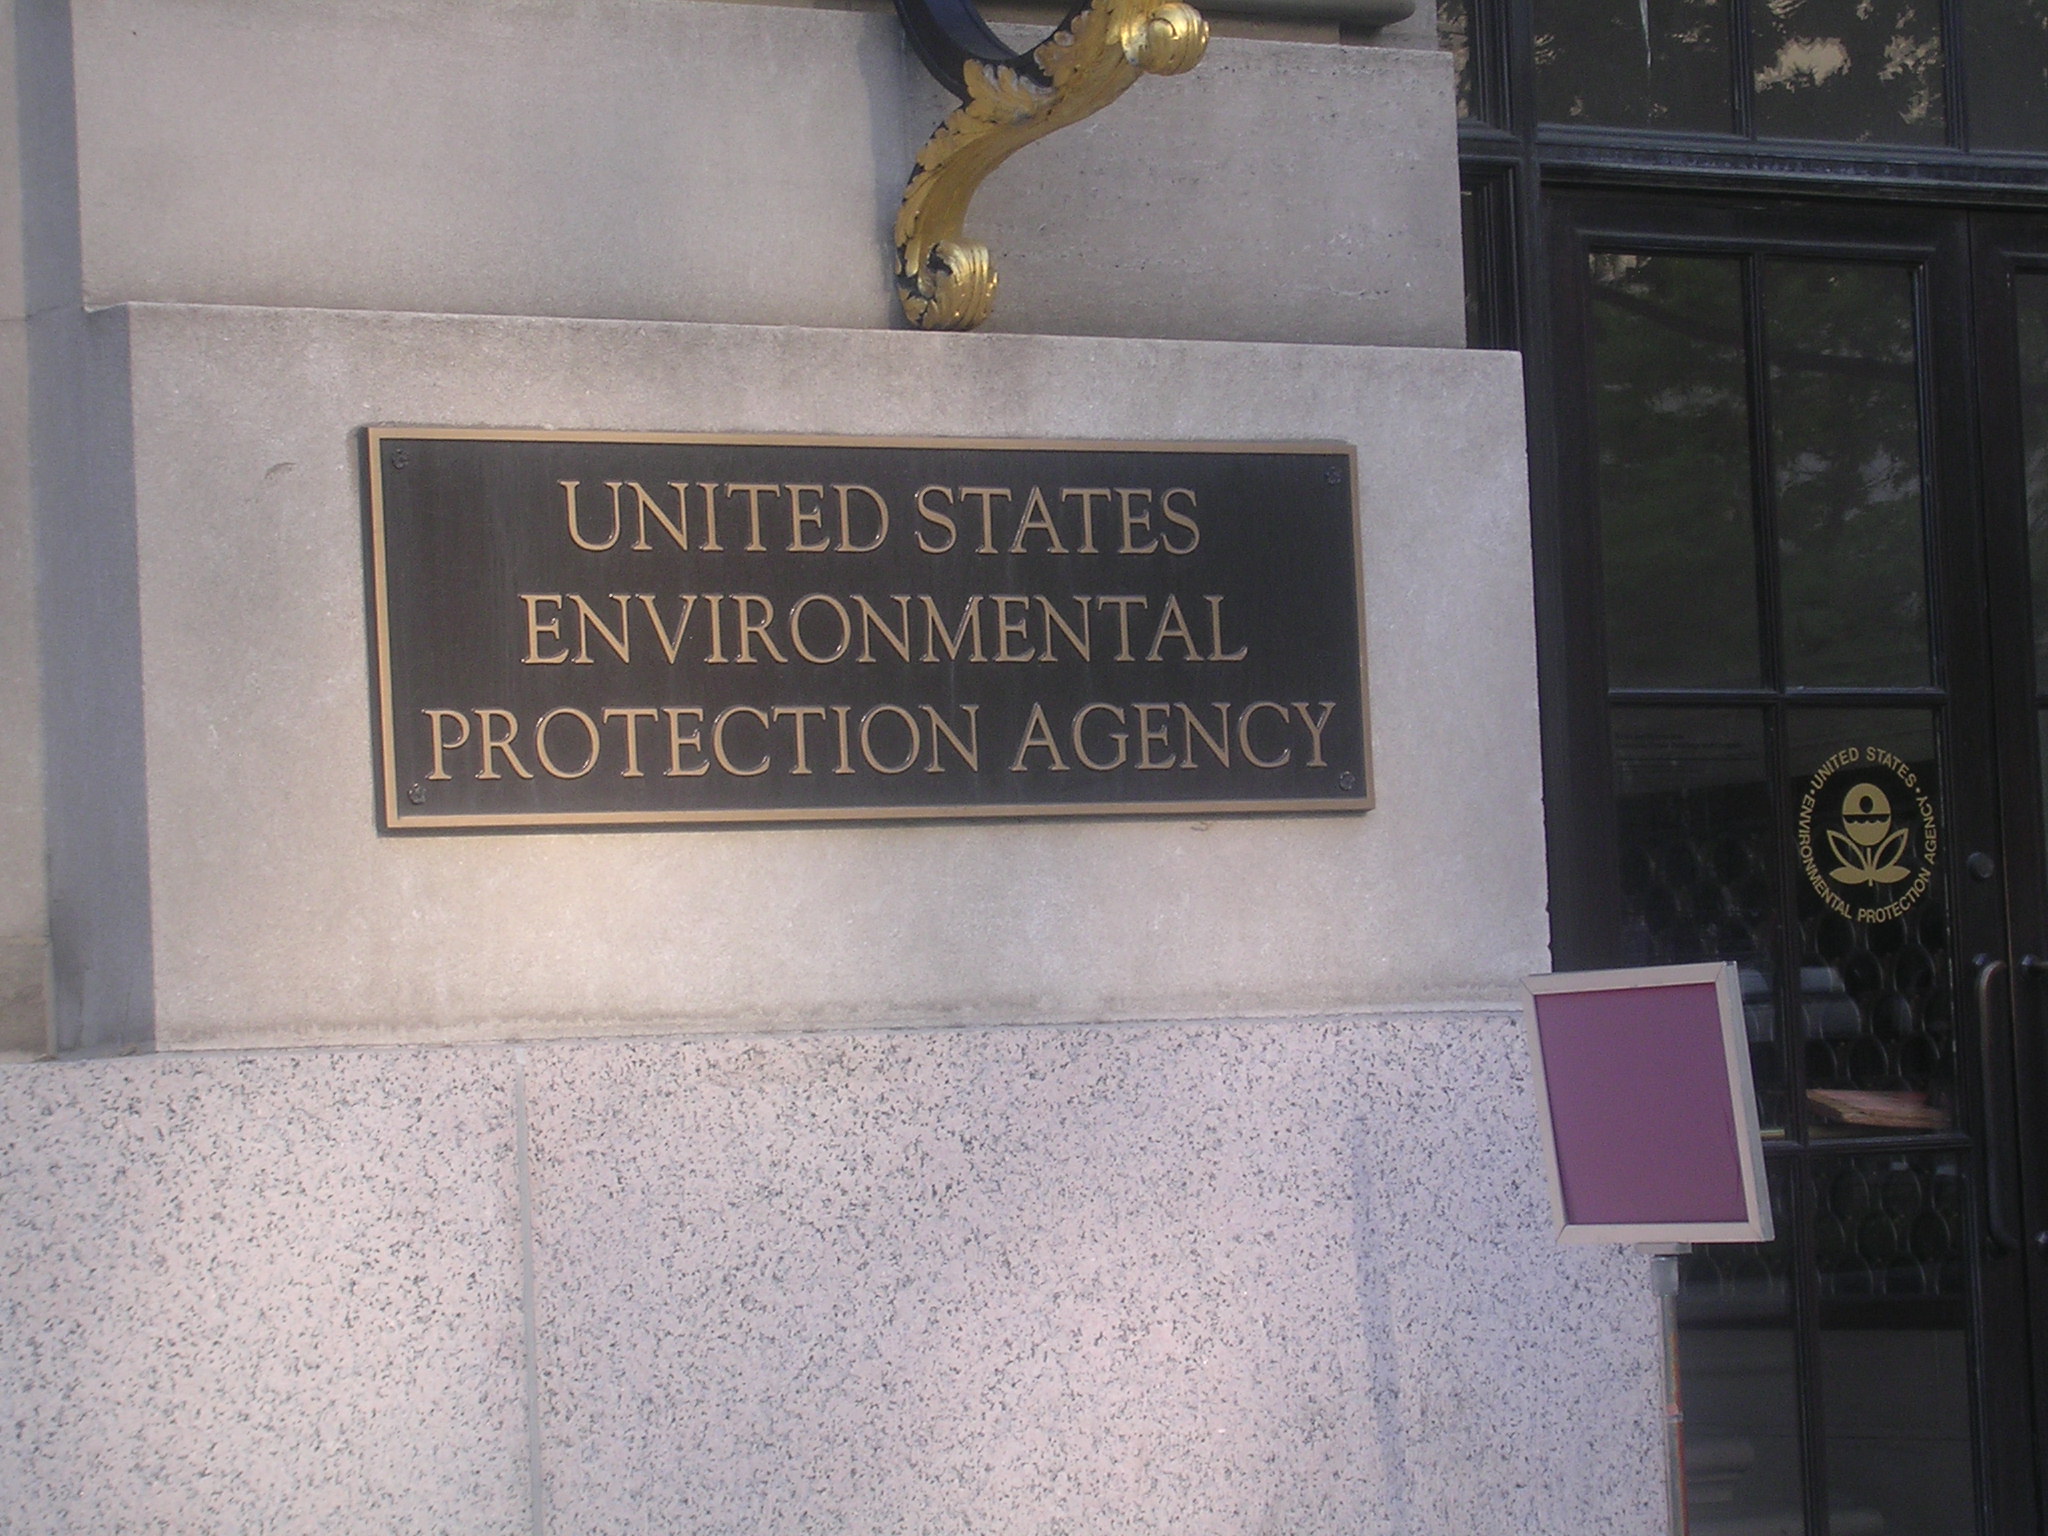 The U.S. Environmental Protection Agency. (Mcready | Flickr) (CC BY 2.0) https://creativecommons.org/licenses/by/2.0/